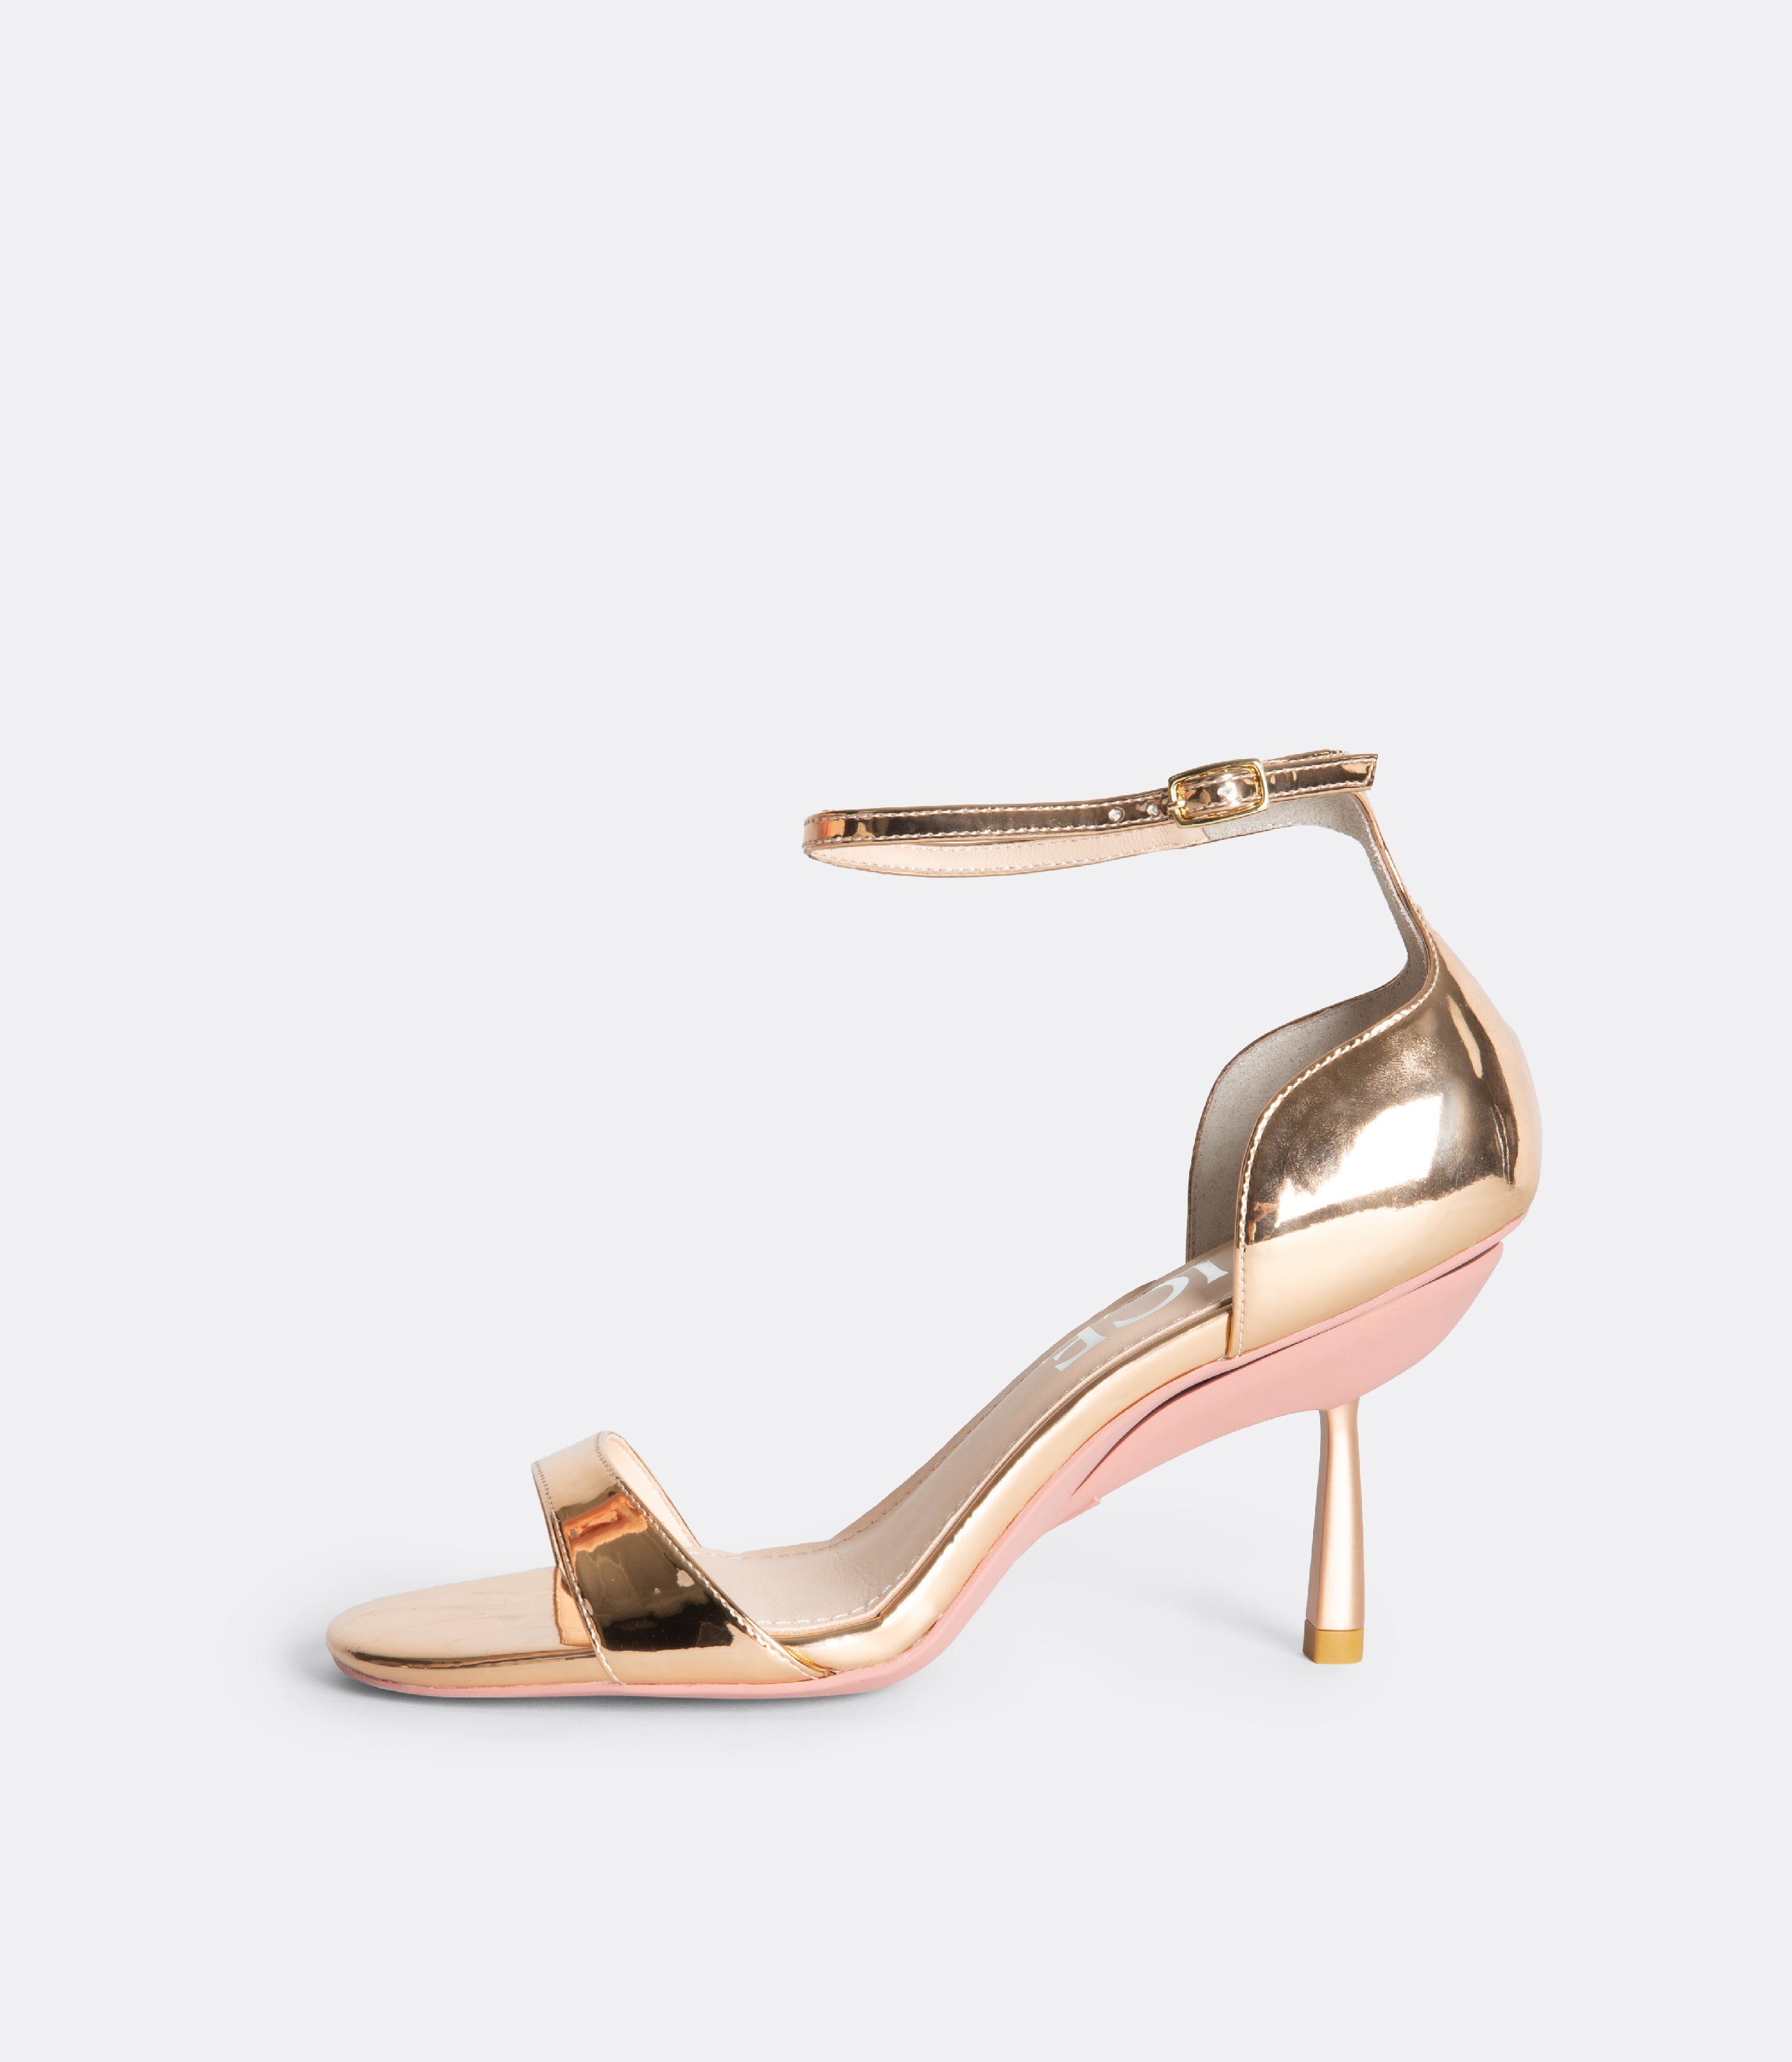 Side view of the rose gold editor sandal.